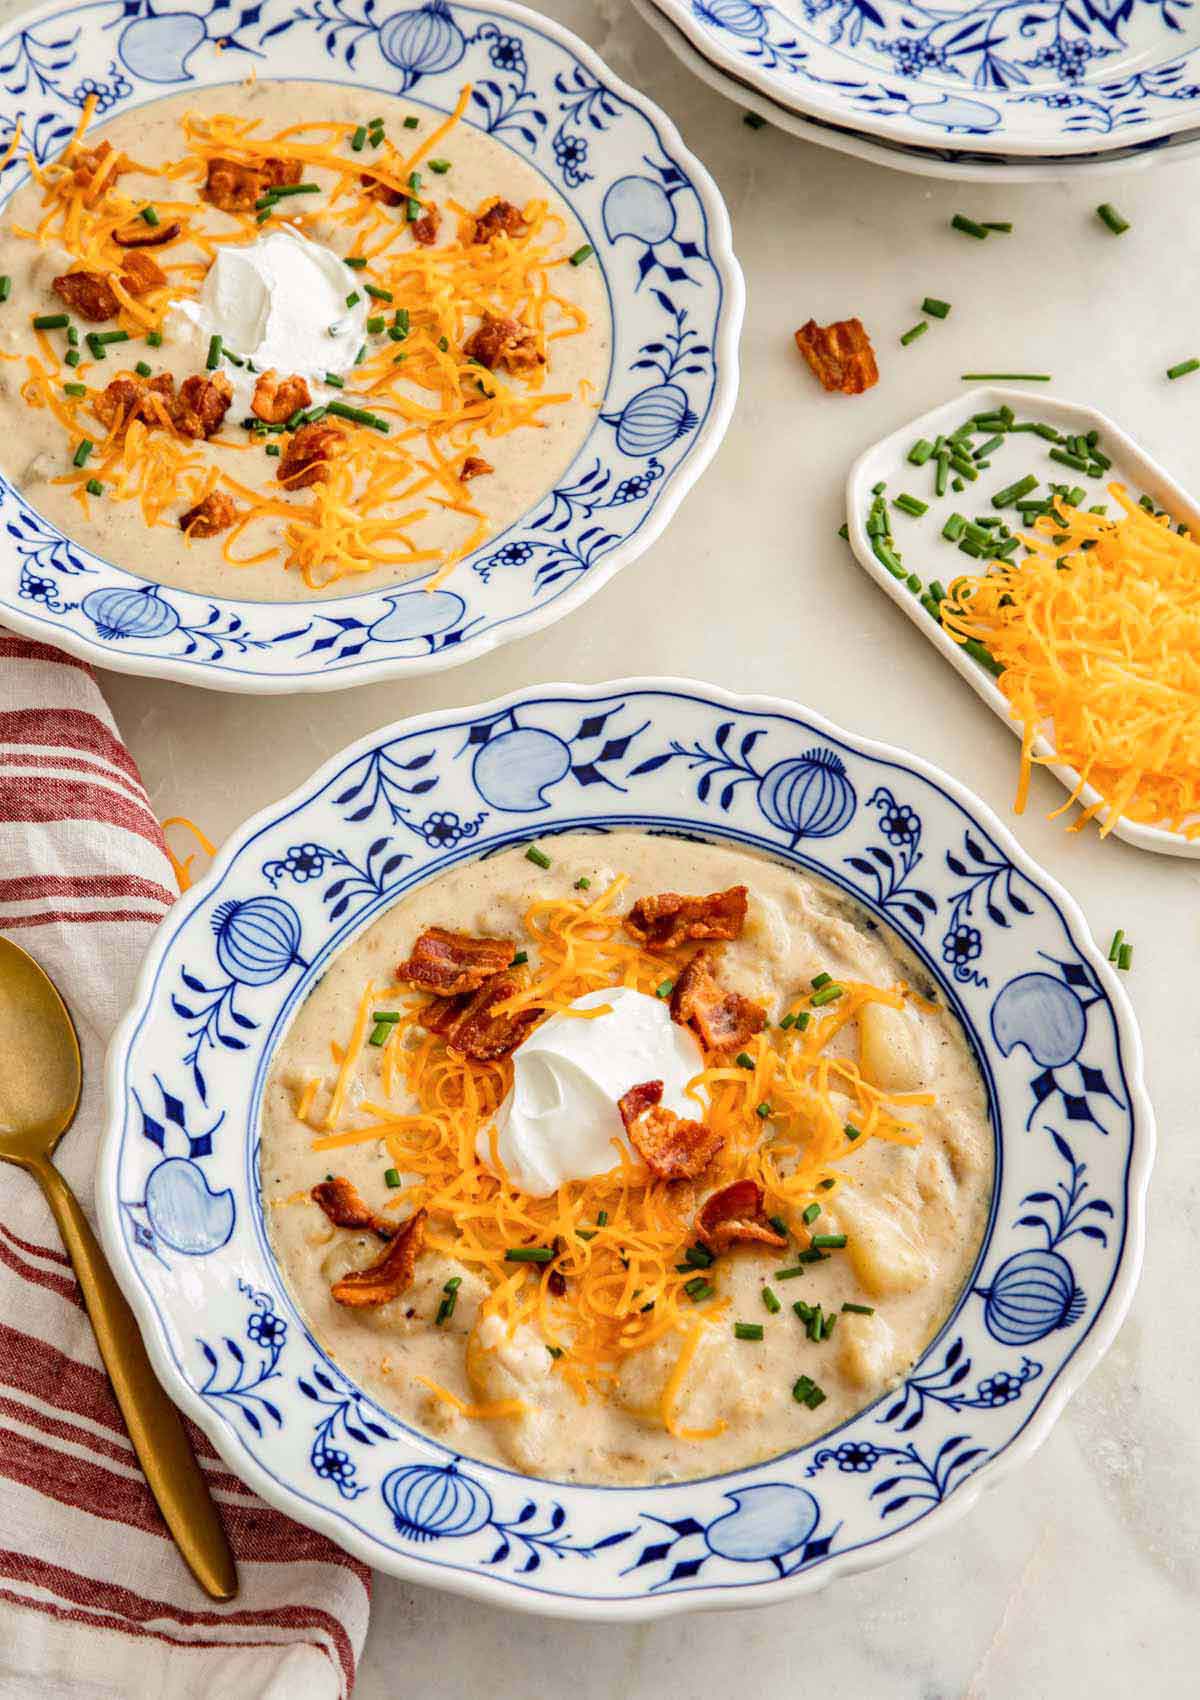 Two shallow bowls of potato soup with shredded cheese, bacon, sour cream, and chives on top.